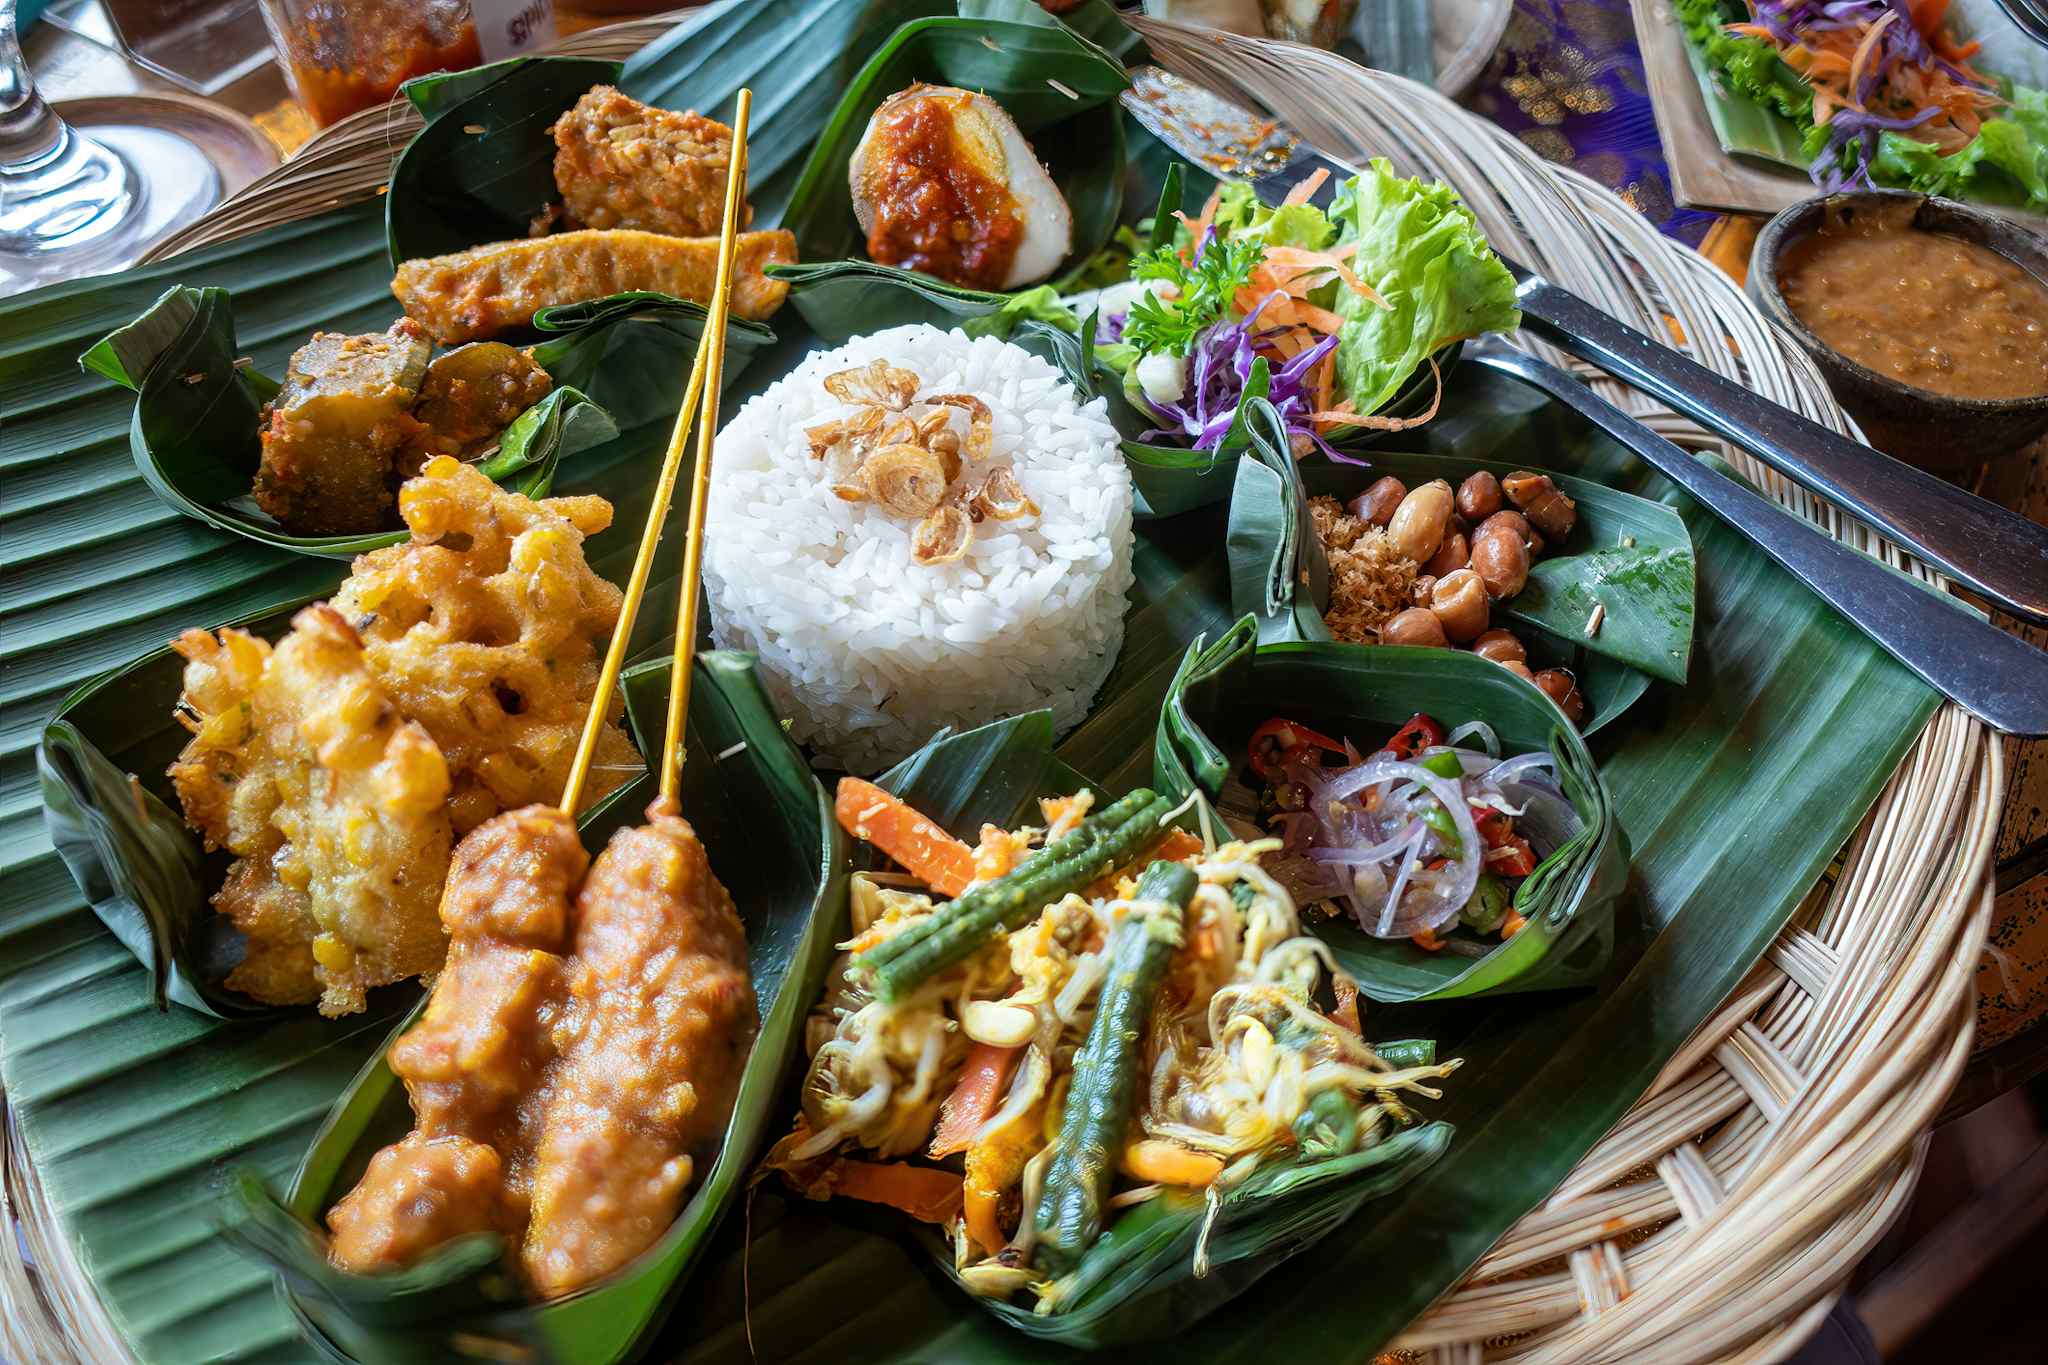 An Indonesian dinner consisting of small dishes including satay, rice, tempeh and salads in Bali.